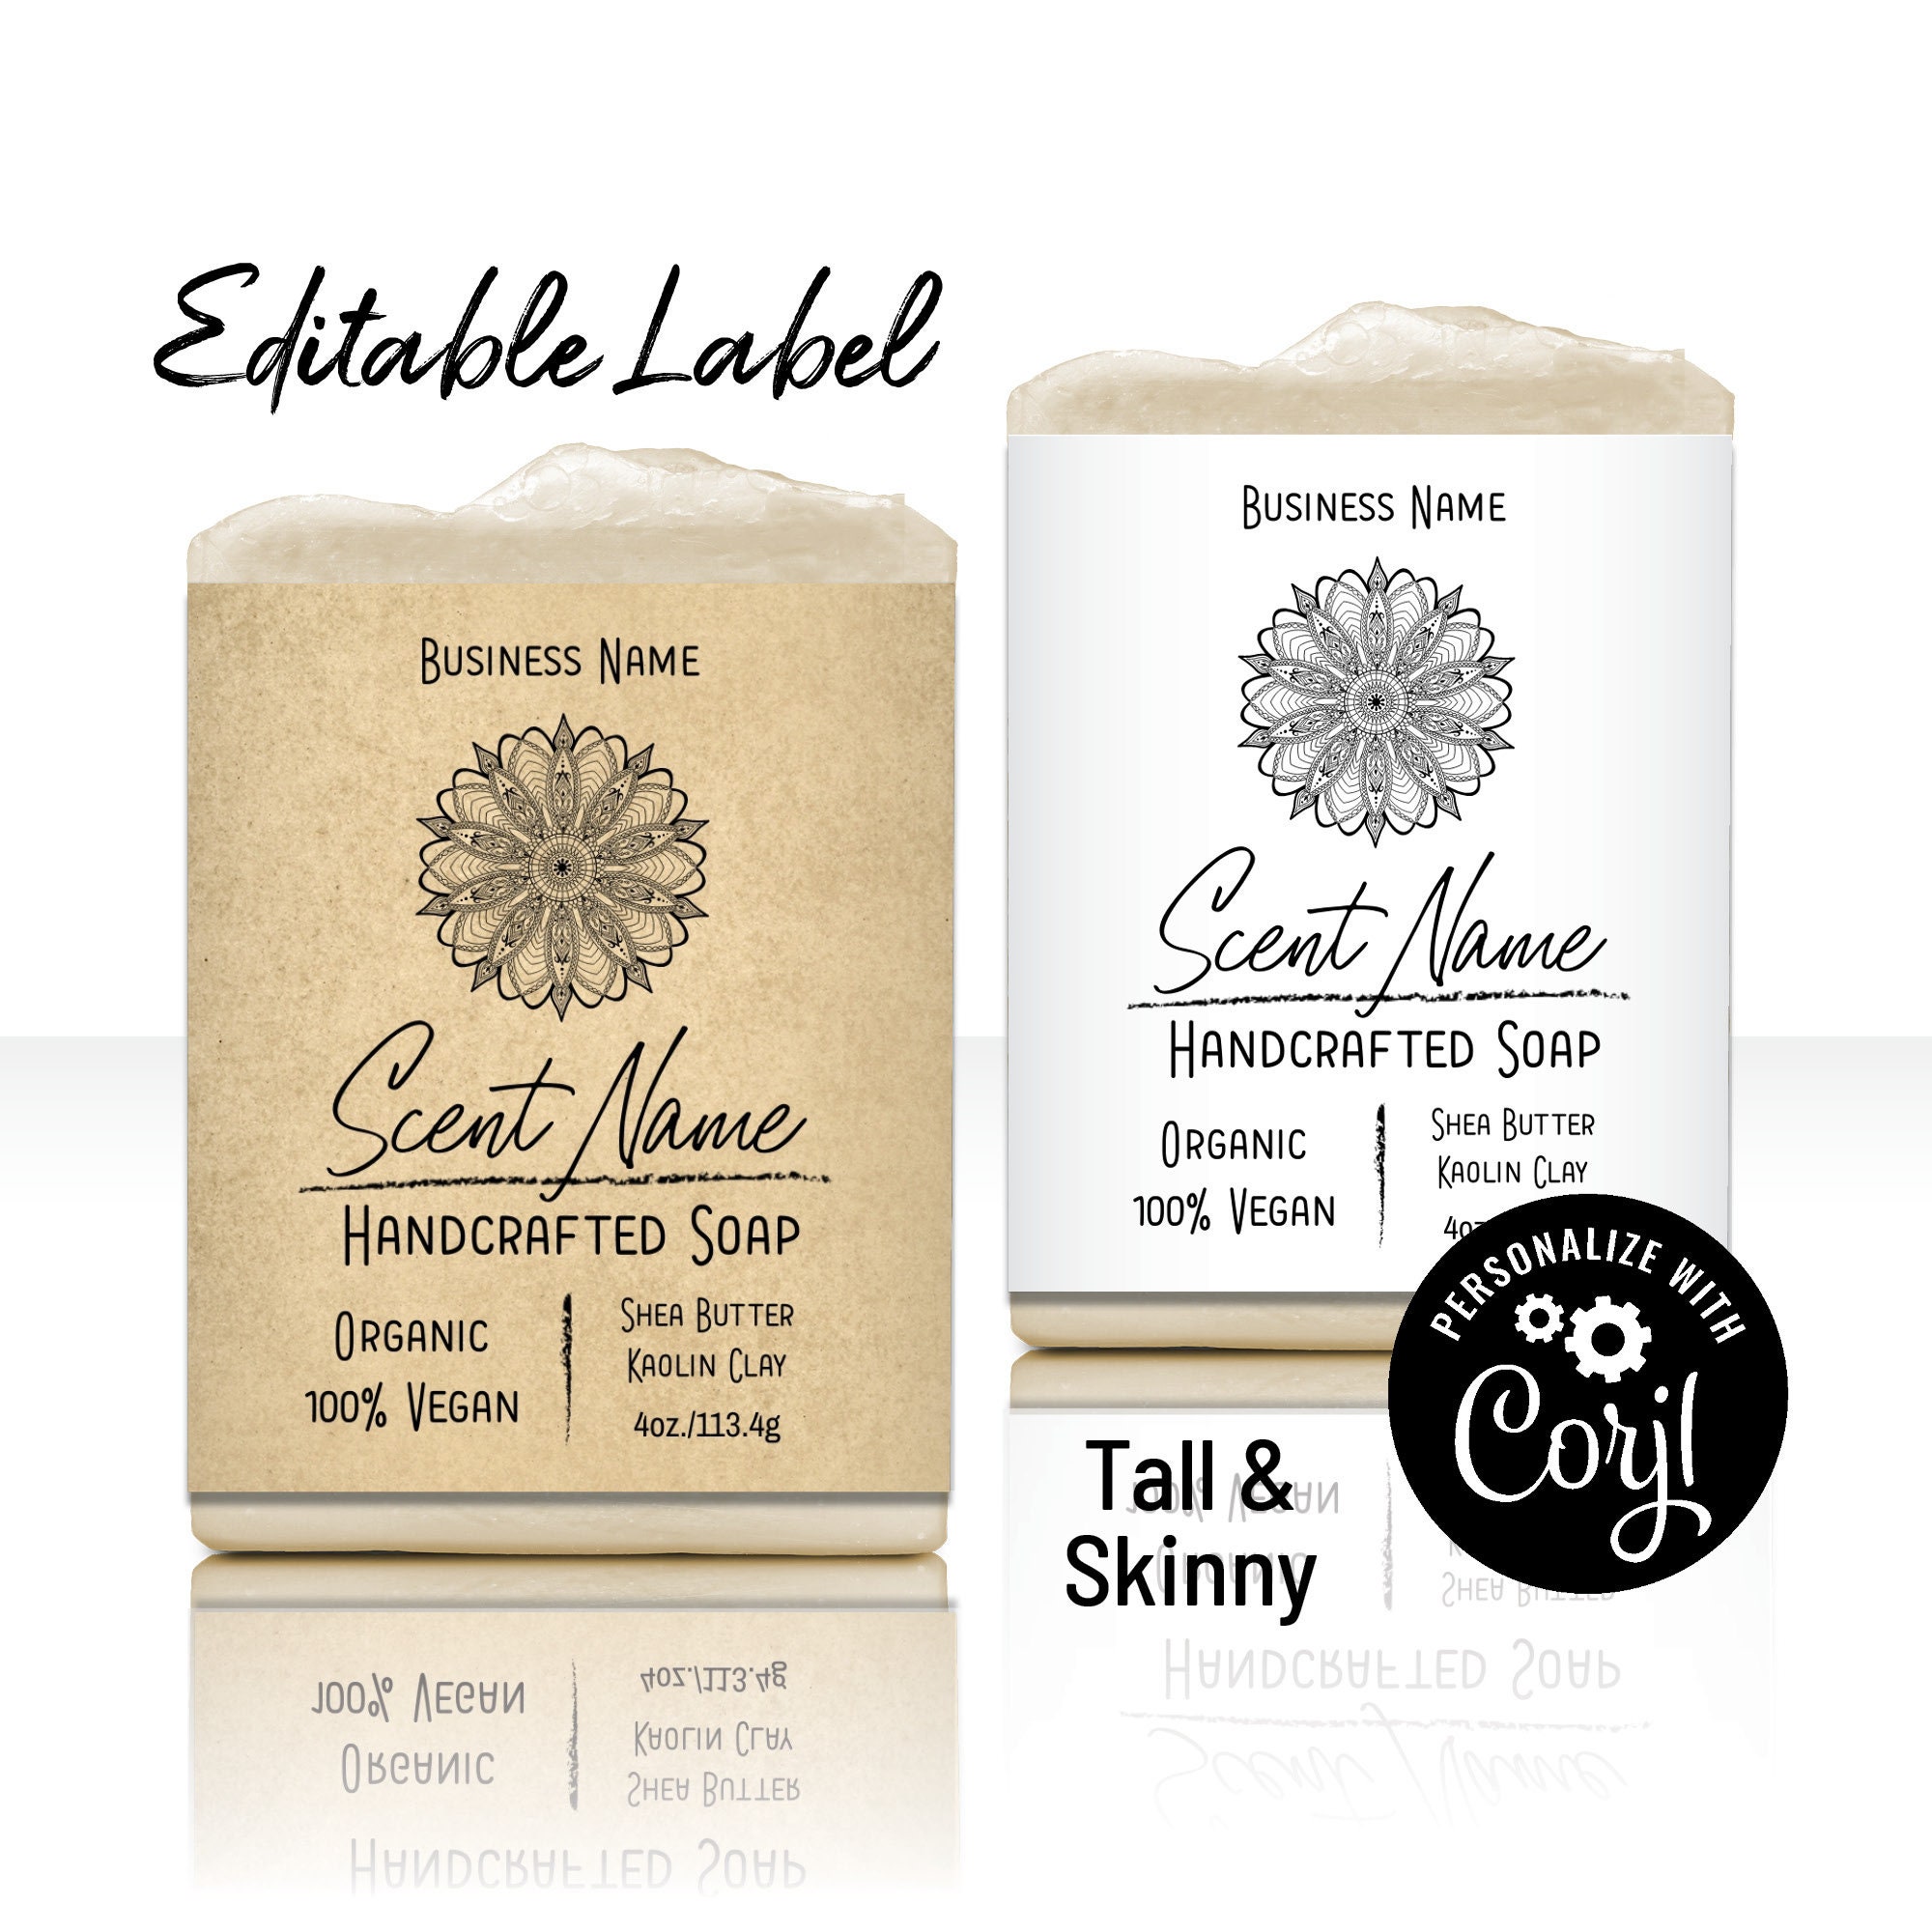 Editable Soap Label Template. Tall & Skinny Hand-drawn Design. Wrap Around Soap  Packaging. Customize, Personalize Online, Download and Print 